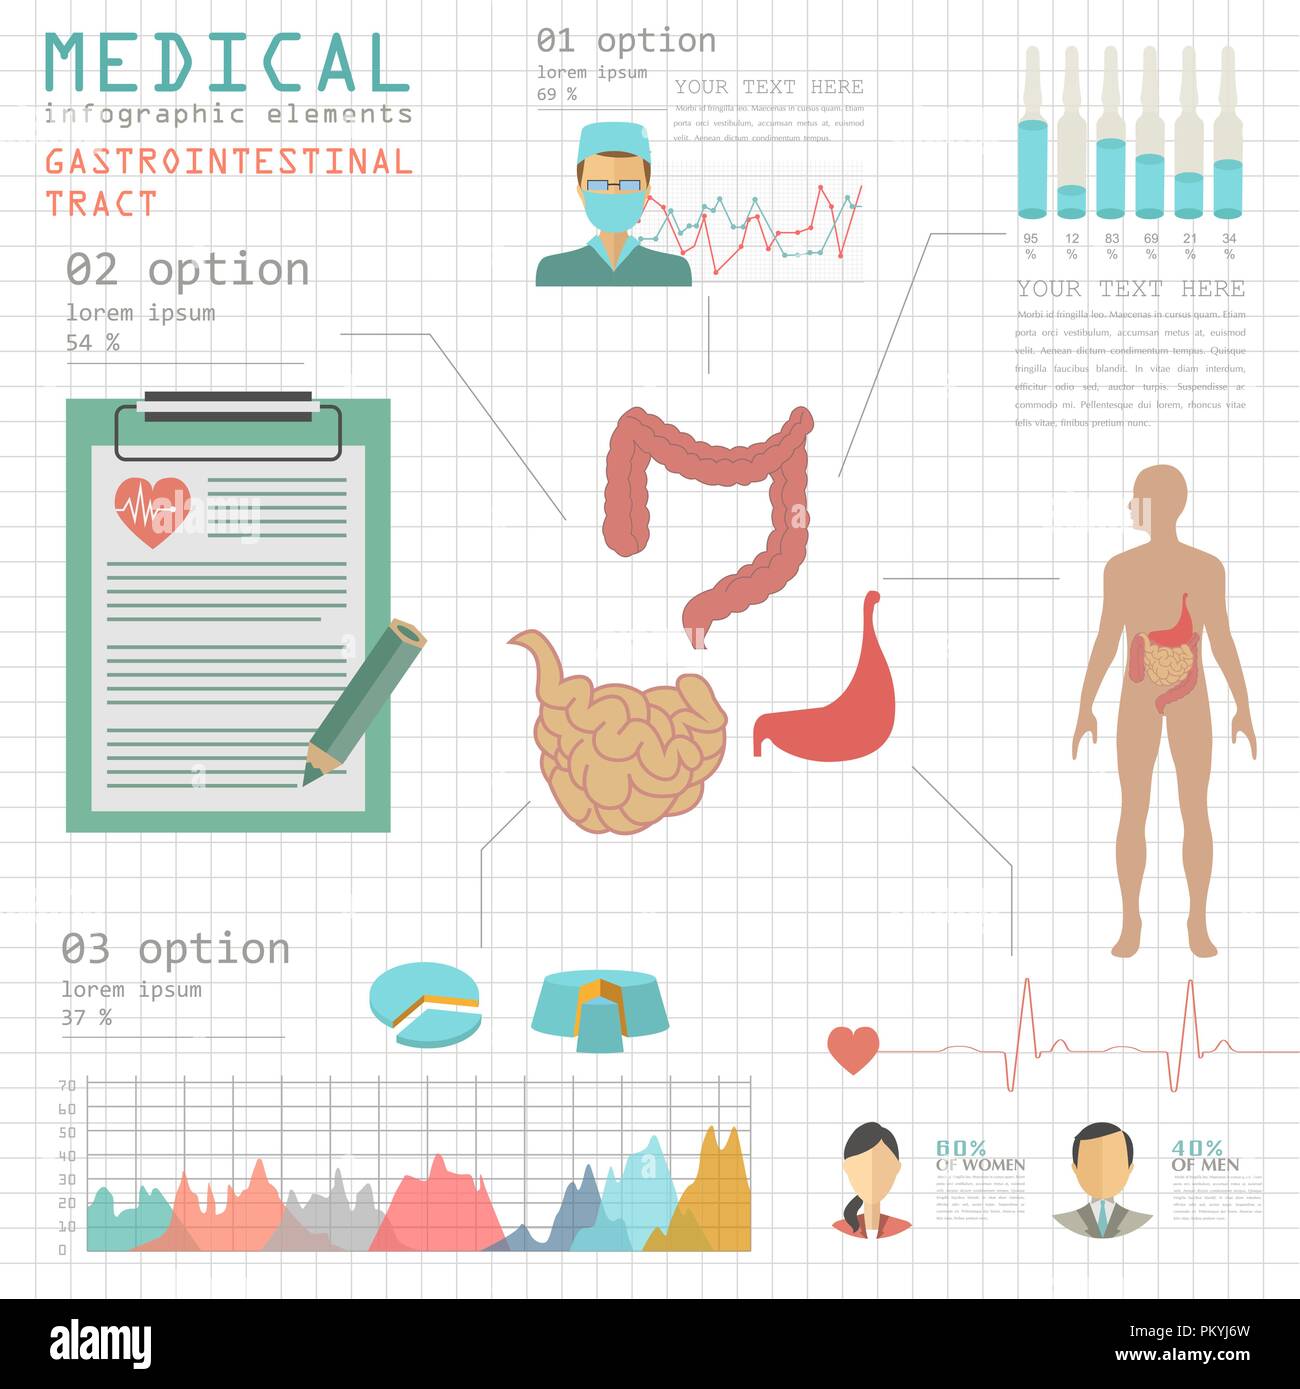 Medical and healthcare infographic, gastrointestinal tract infographics. Vector illustration Stock Vector